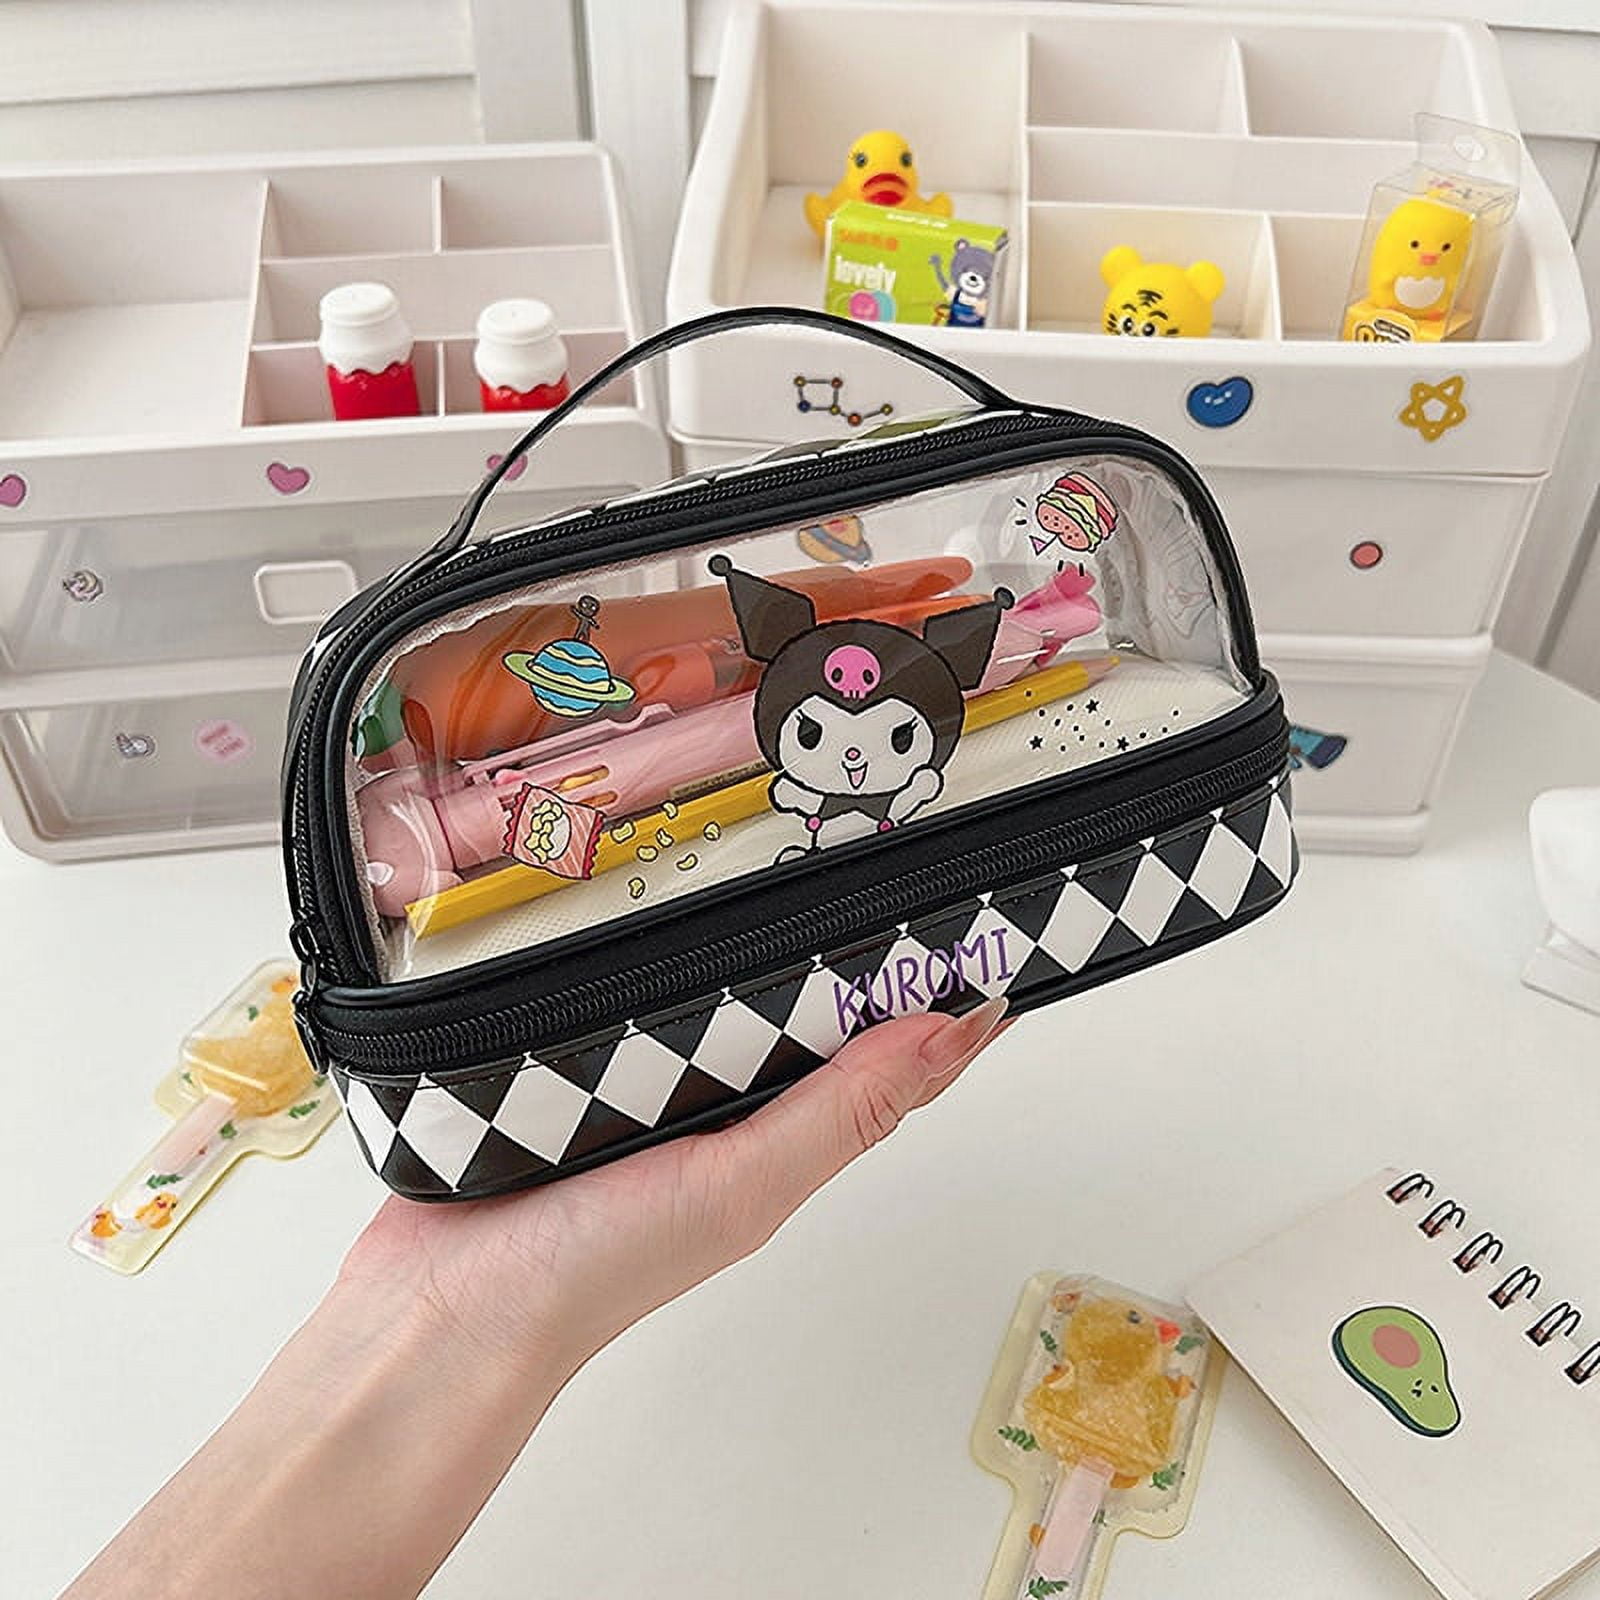 Sanrio Characters Stationery Set My Melody Hello Kitty Kuromi Pencil Case  New